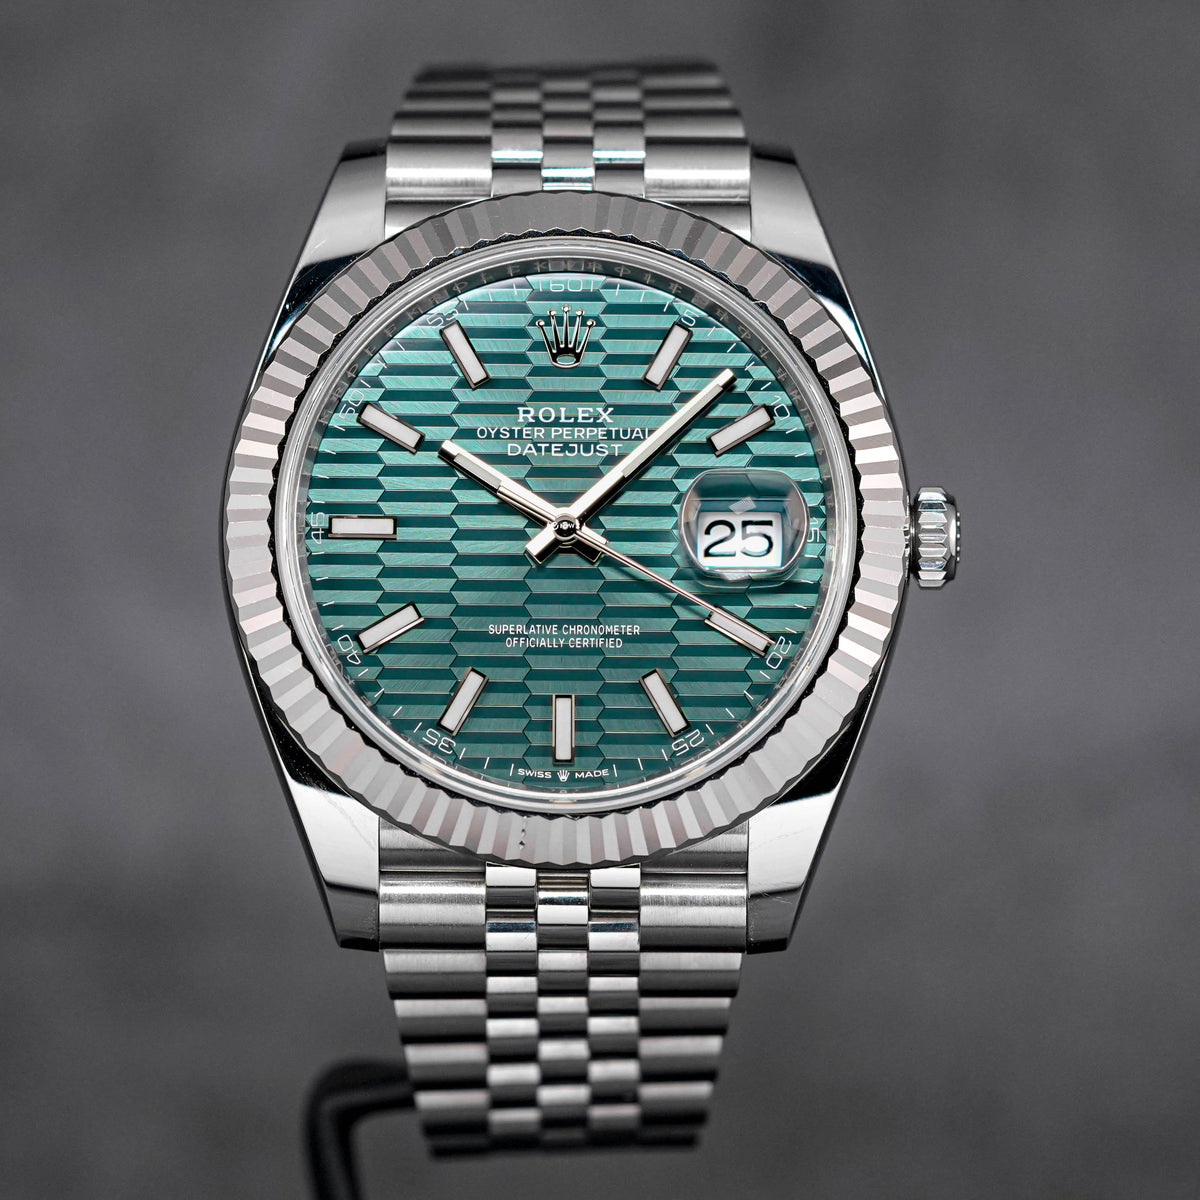 Datejust Mint Green Fluted Dial